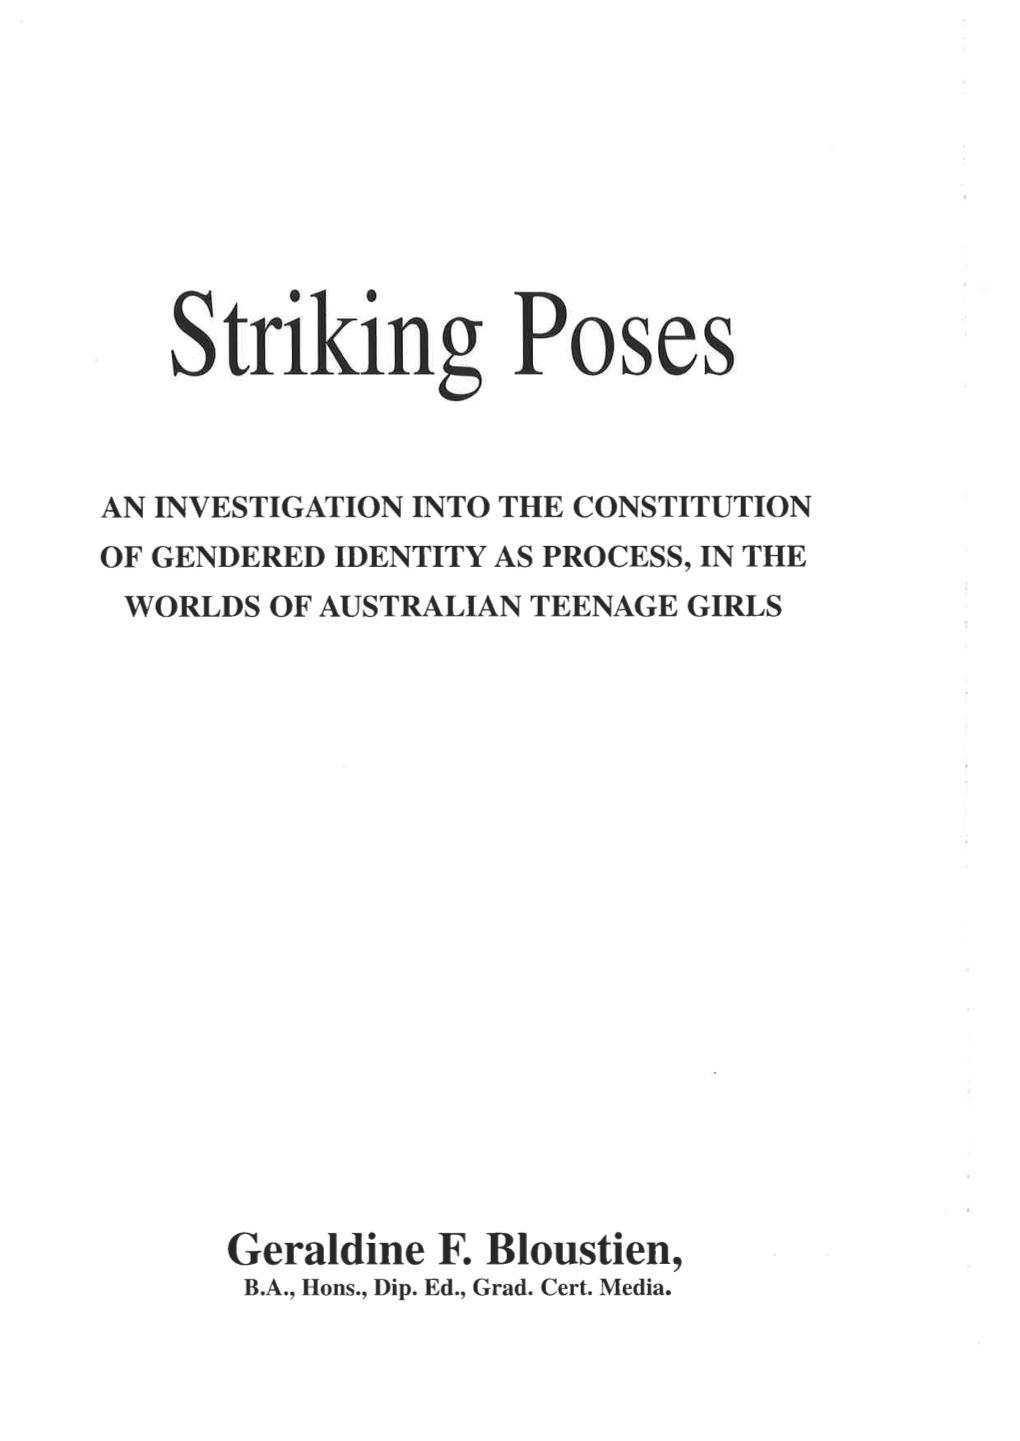 Striking Poses: an Investigation Into the Constitution of Gendered Identity As Process, in the Worlds of Australian Teenage Girl